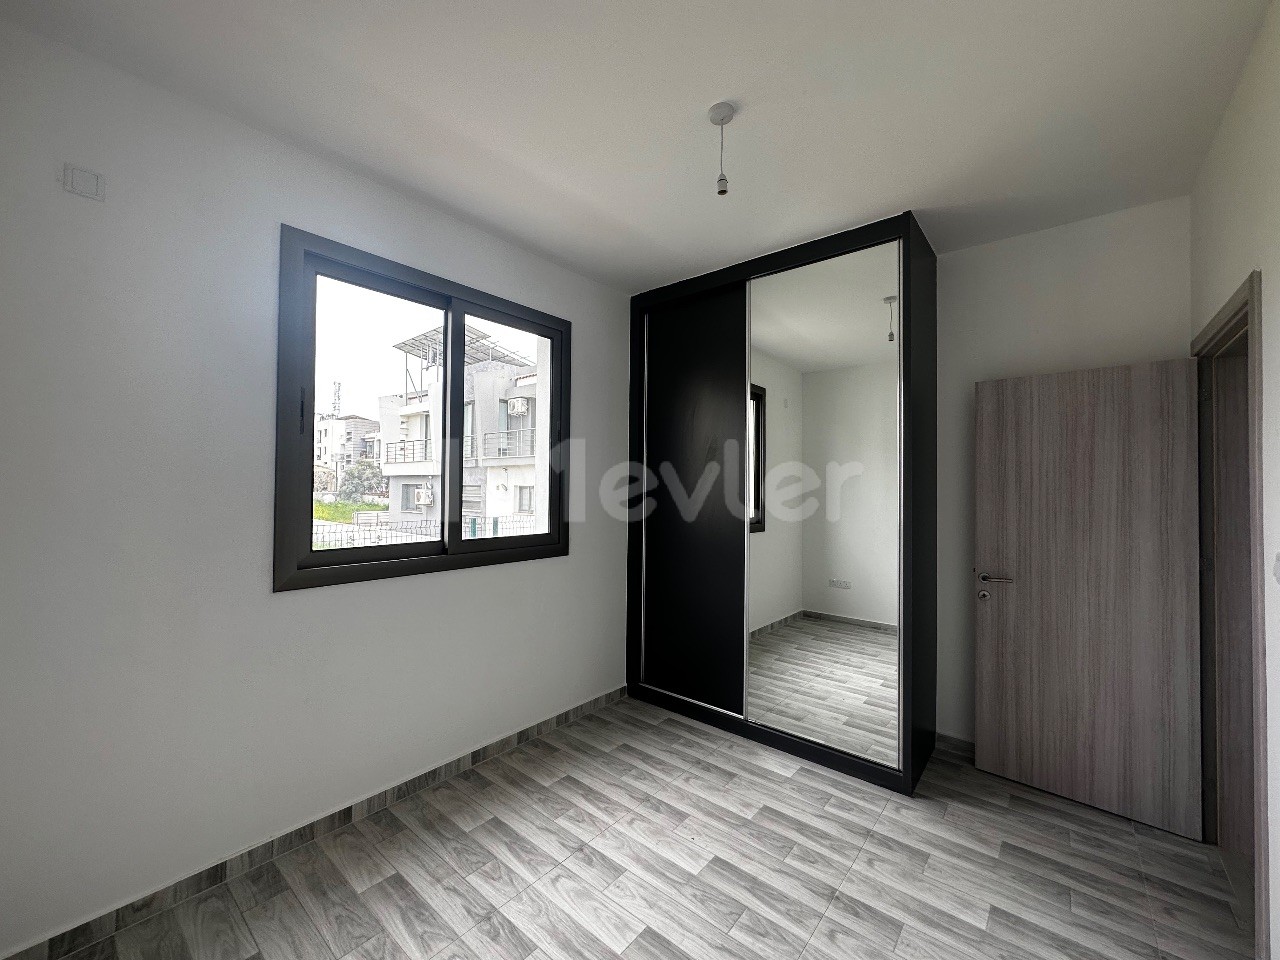 2+1 APARTMENTS WITH QUALITY WORKMANSHIP AND AN ELITE LOCATION IN THE METEHAN REGION OF LEFKOŞA 